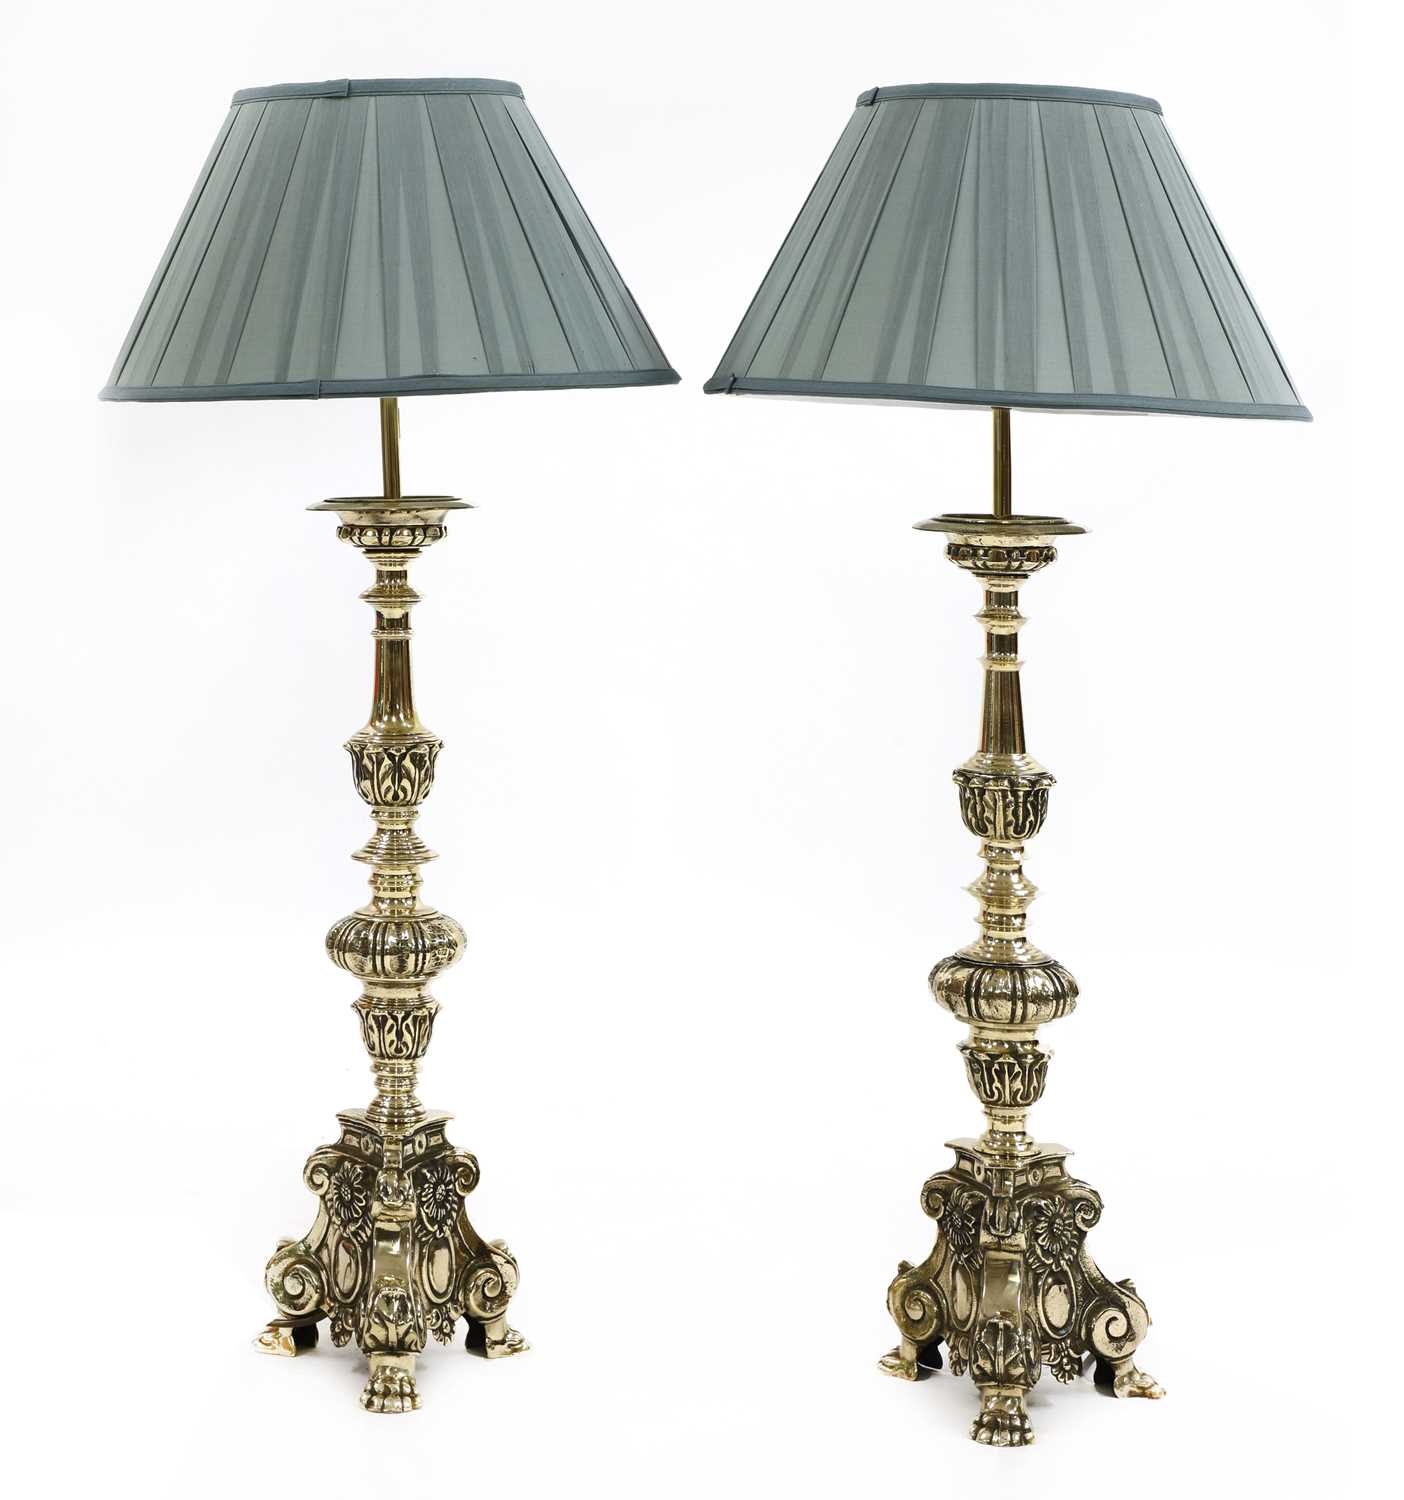 Lot 99 - A matched pair of Dutch-style brass altar candlestick table lamps